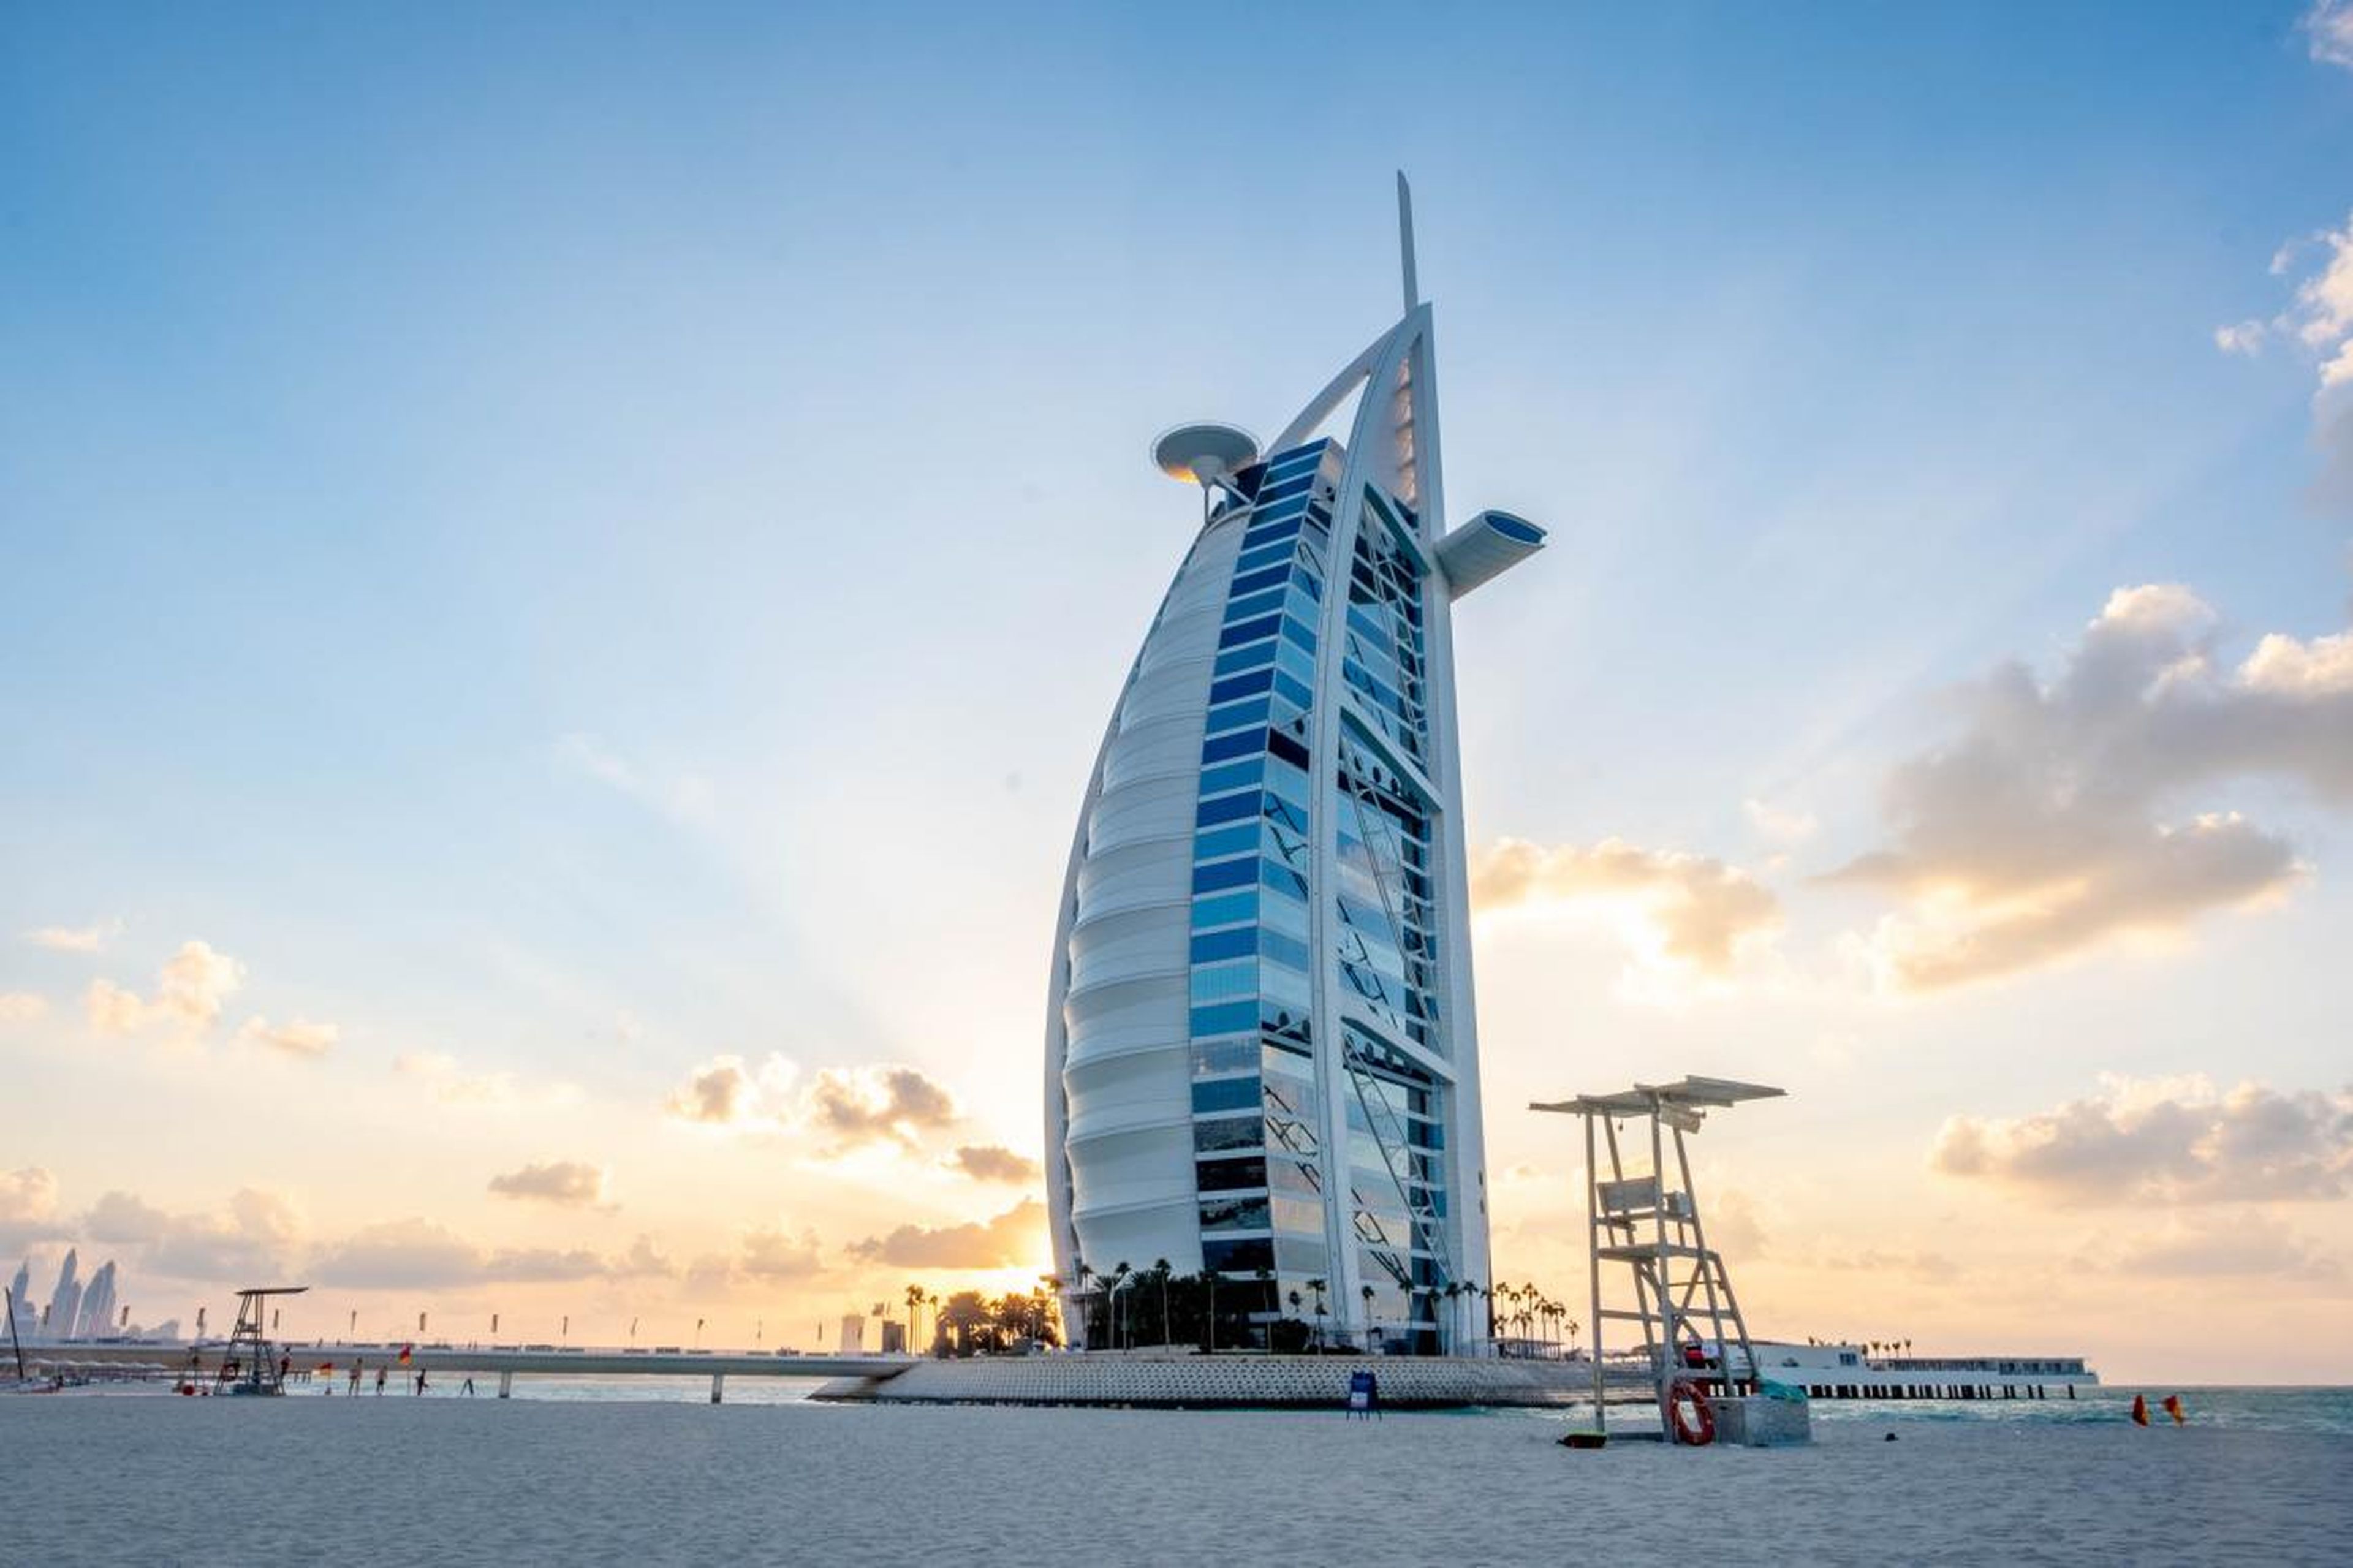 Shaped like the sail of an Arabian dhow ship and built for $1 billion, the Burj Al Arab in Dubai has been described as the world's first seven-star hotel and the most luxurious hotel in the world.